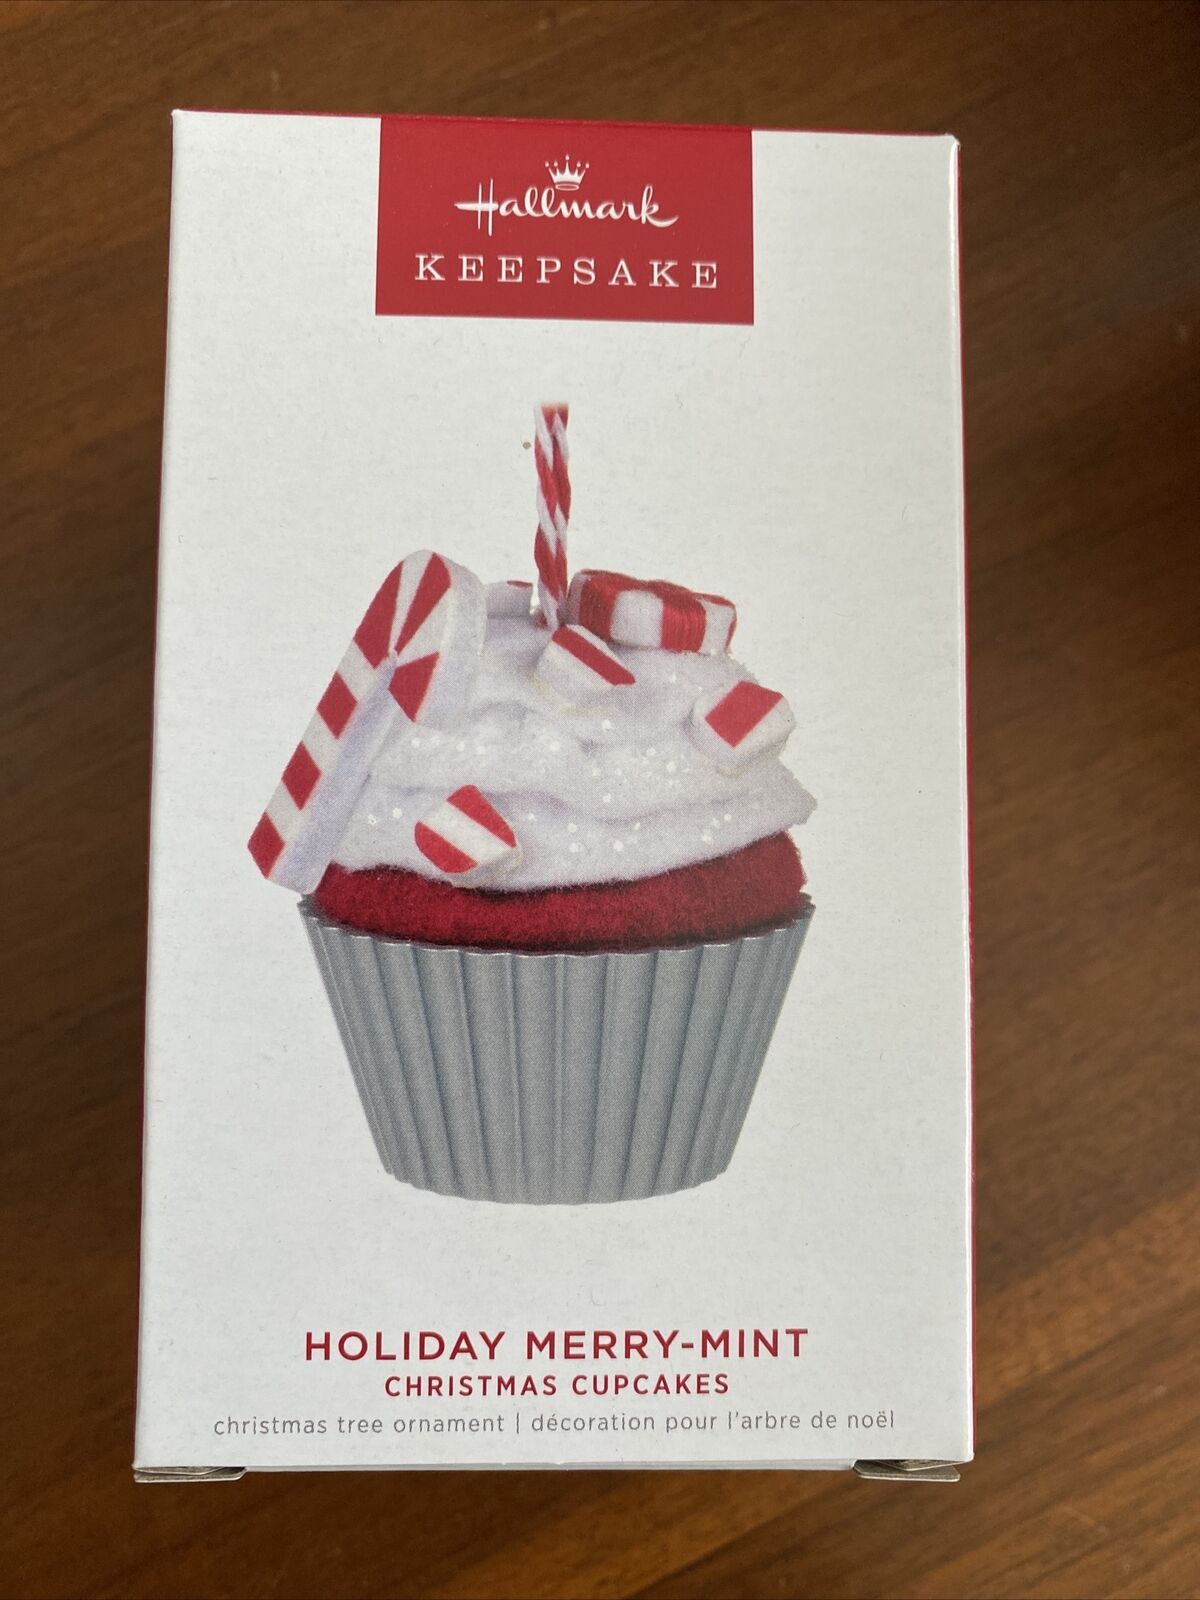 HALLMARK 2022 CHRISTMAS CUPCAKES HOLIDAY MERRY-MINT # 13 IN SERIES ORNAMENT